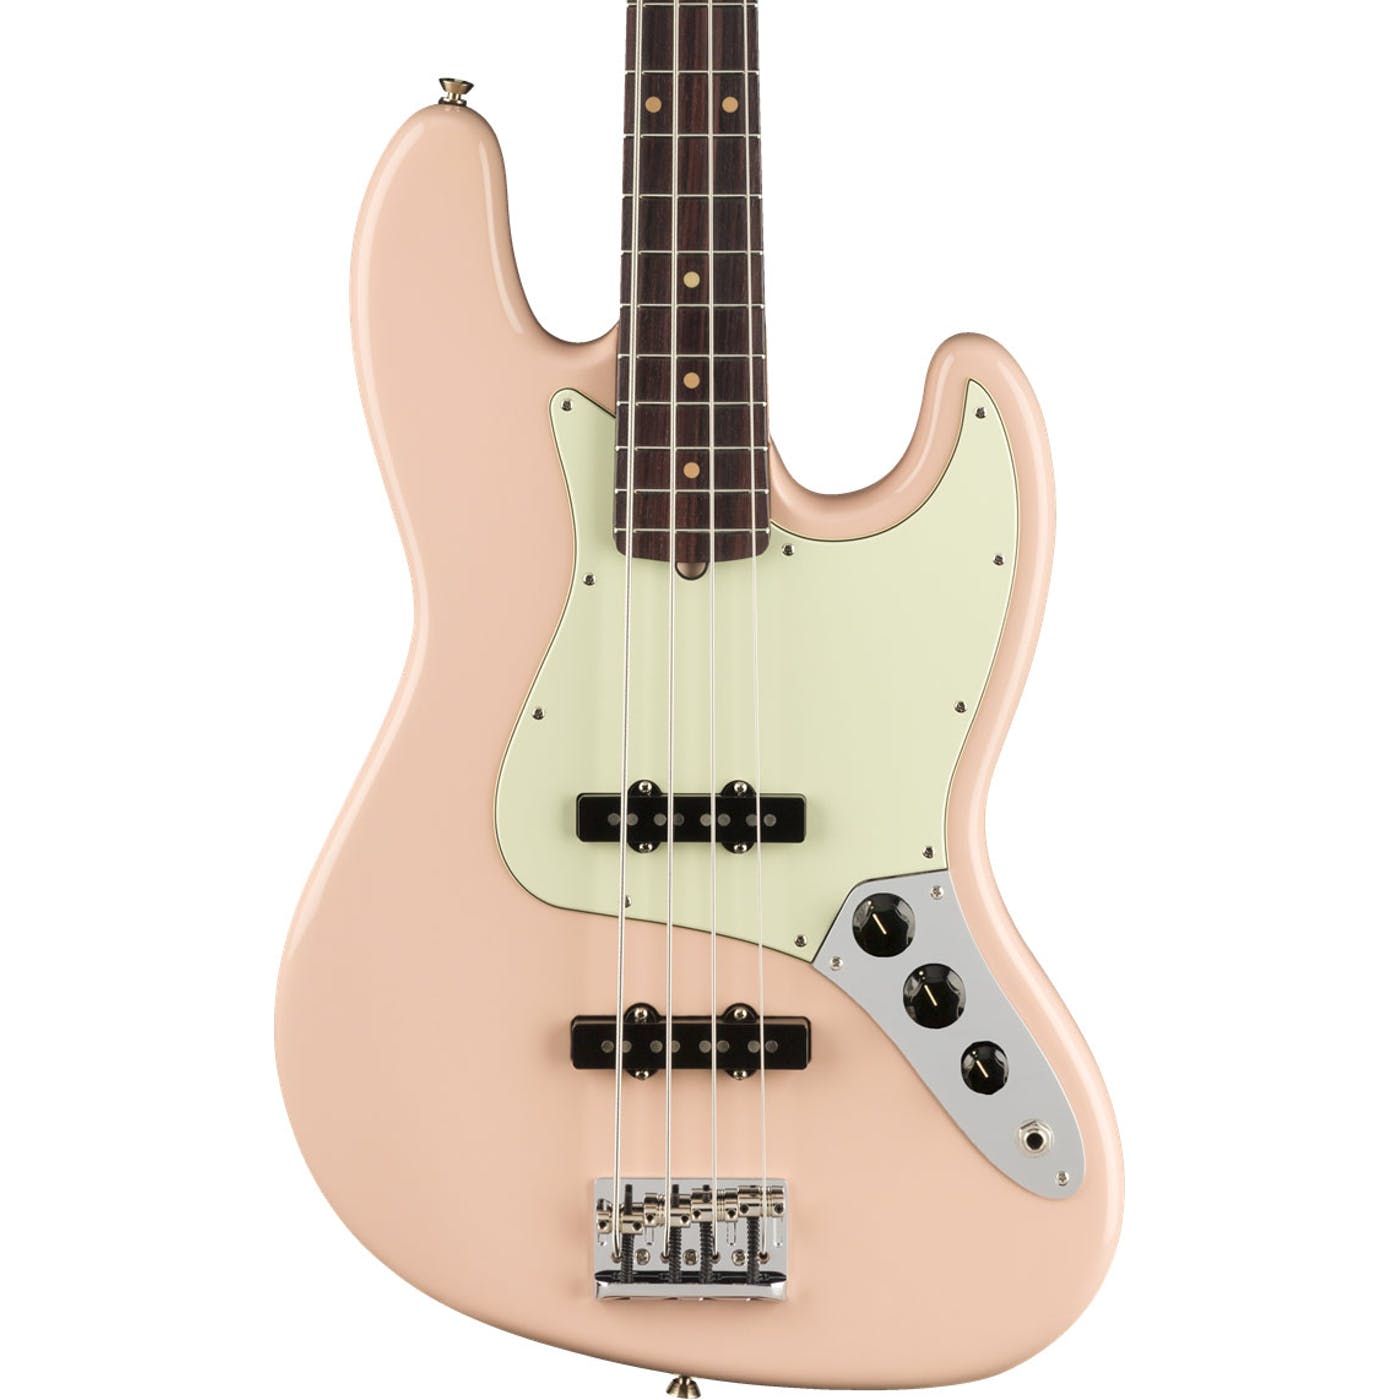 Fender-American-Professional-Jazz-Bass-Ltd.-Edition-in-Shell-Pink-w-Solid-Rosewood-Neck